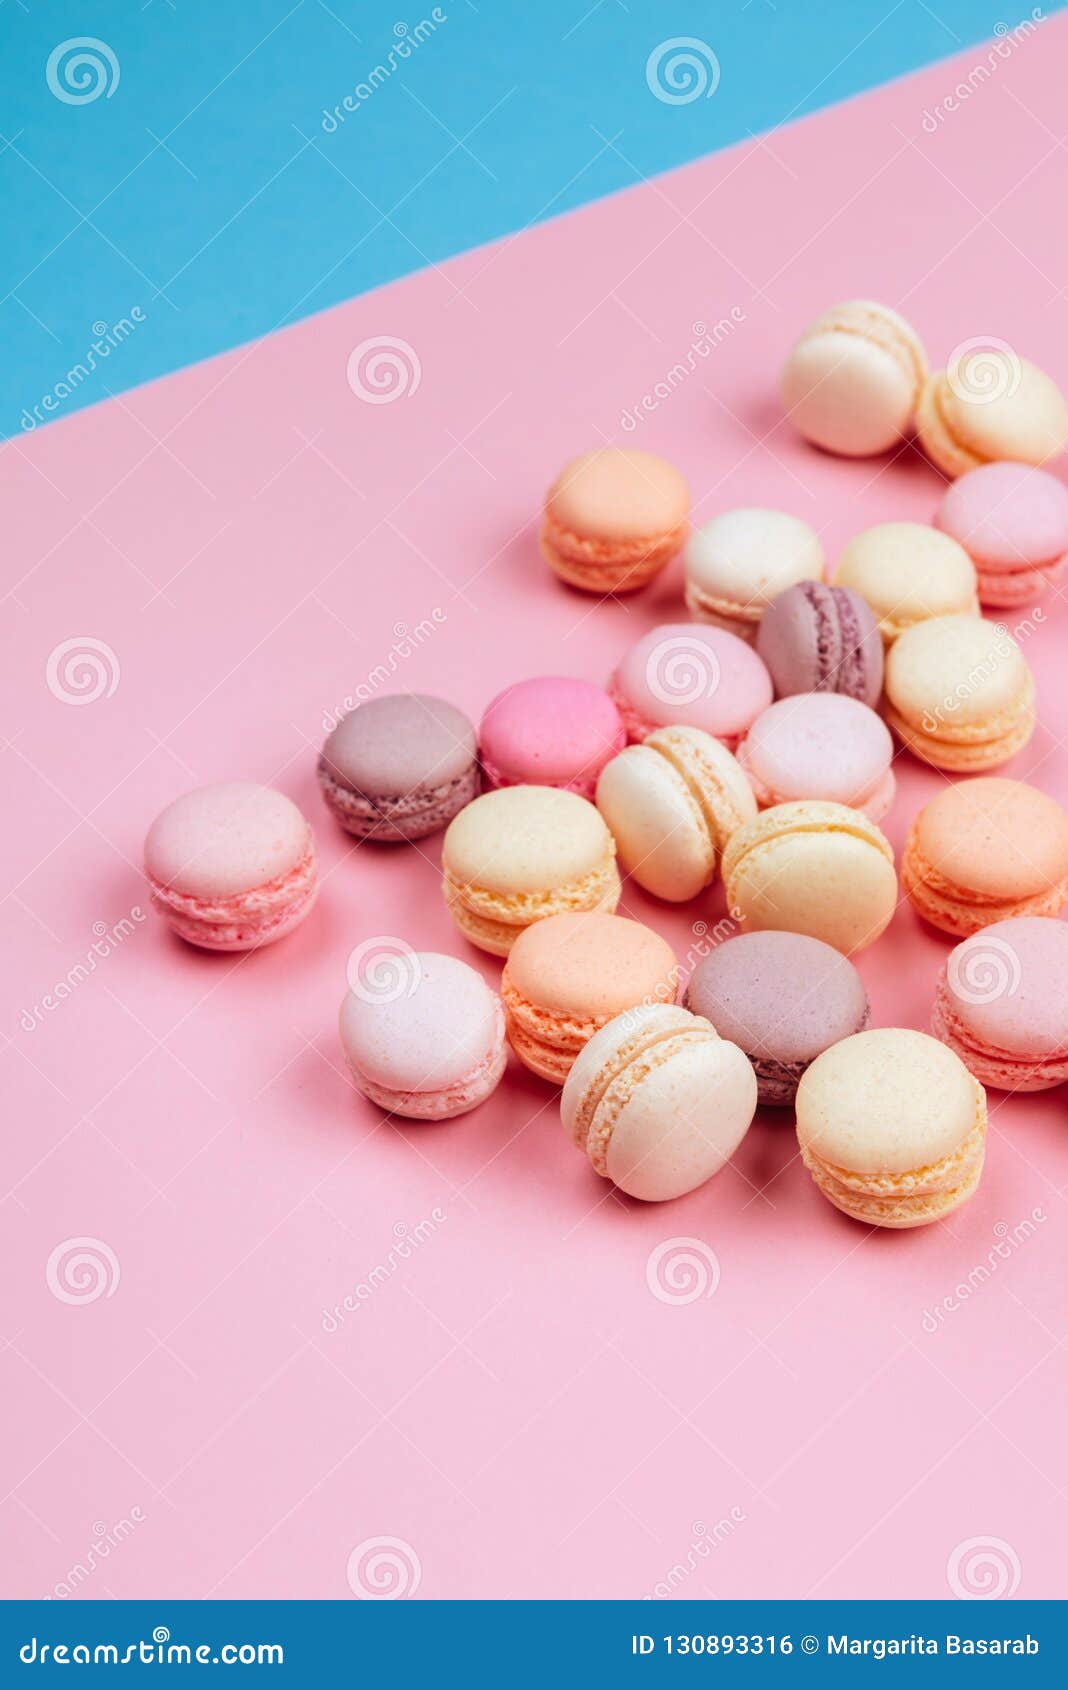 Cake Macaron or Macaroon on Pink and Blue Background. Stock Photo ...